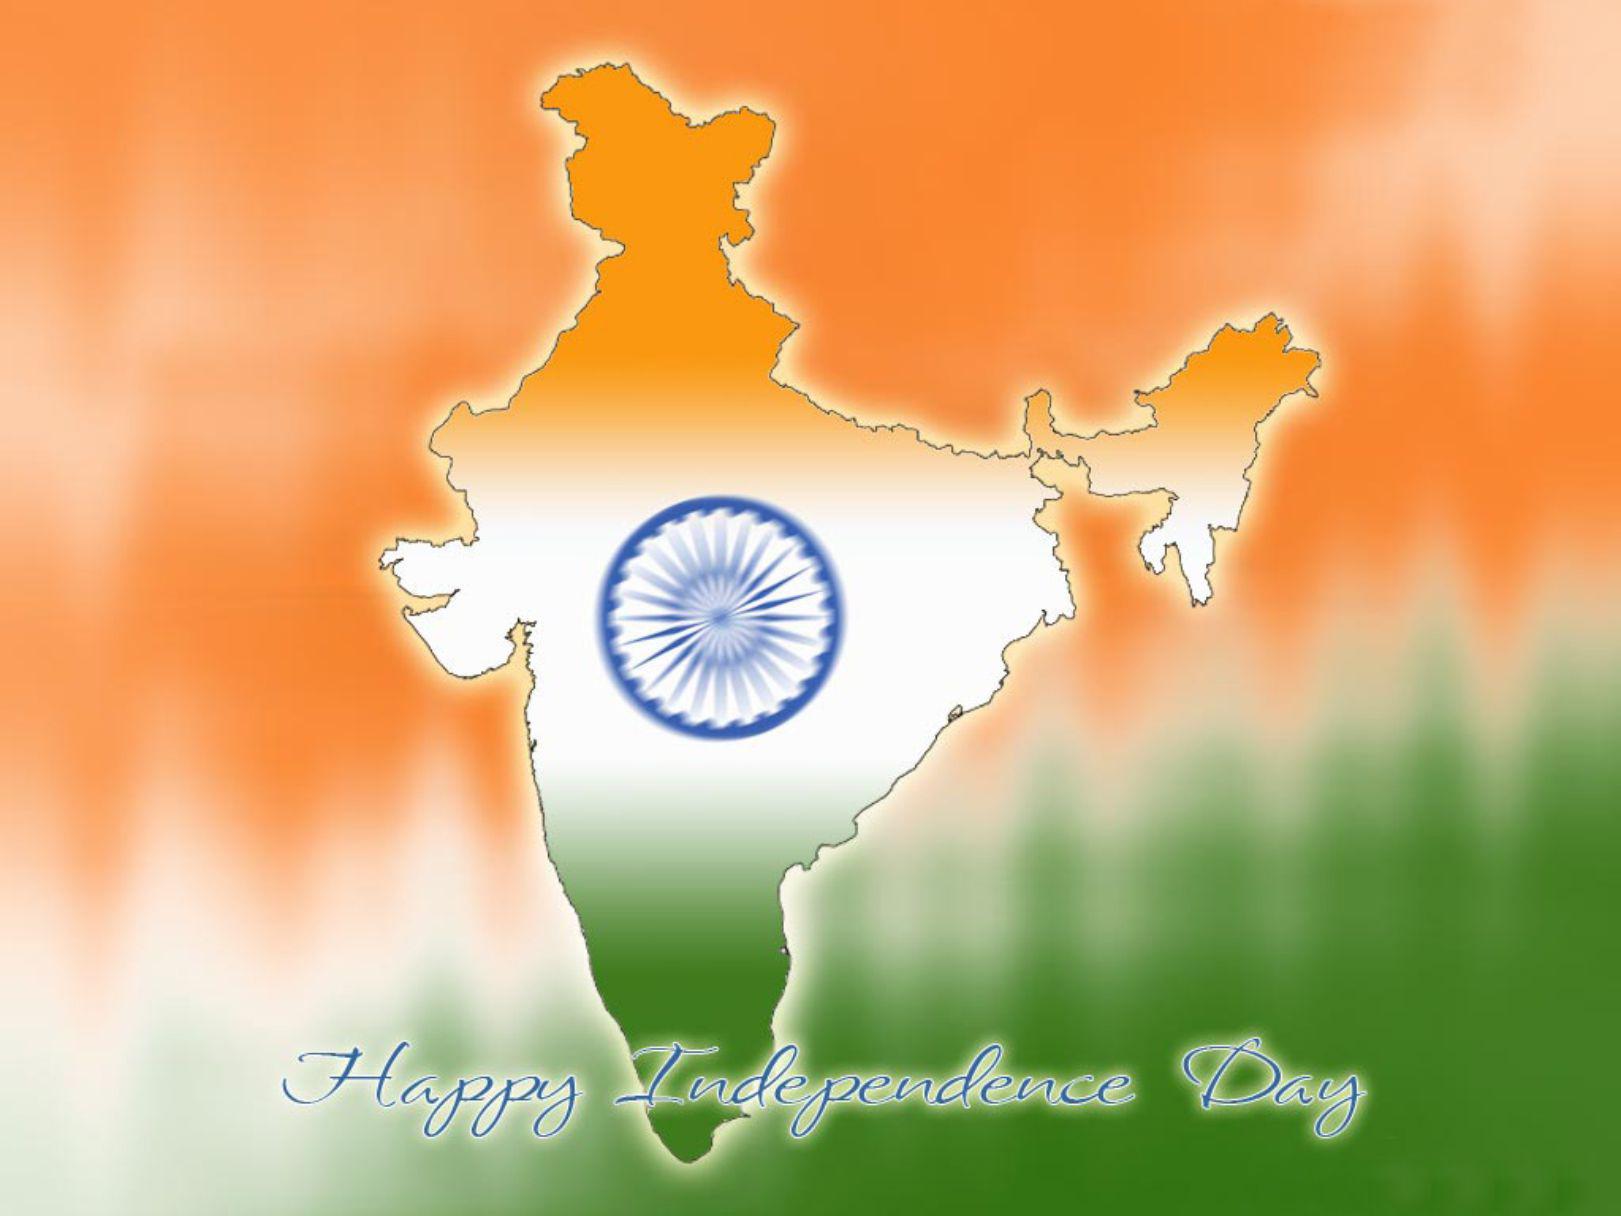 Beautiful Indian Map 15 August Independence Day Image August